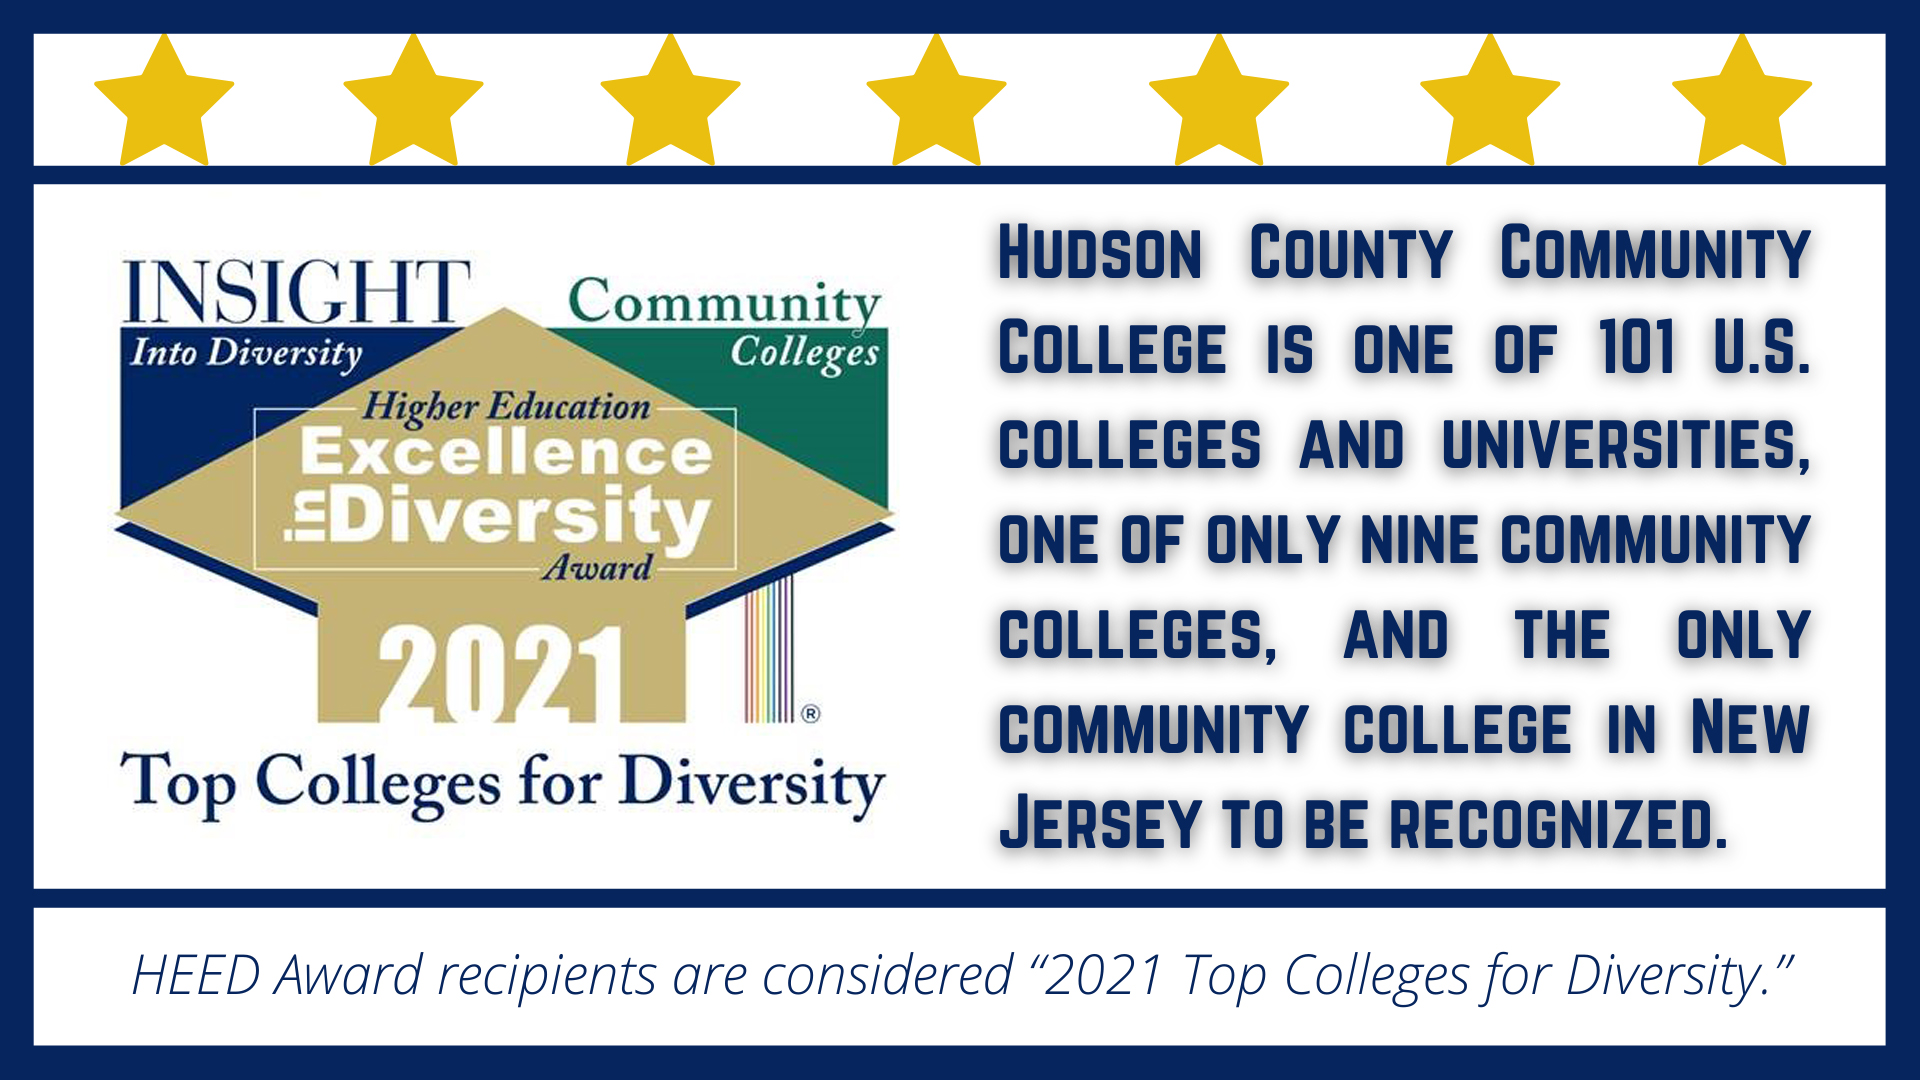 Higher Education Excellence in Diversity INSIGHT (HEED) Award